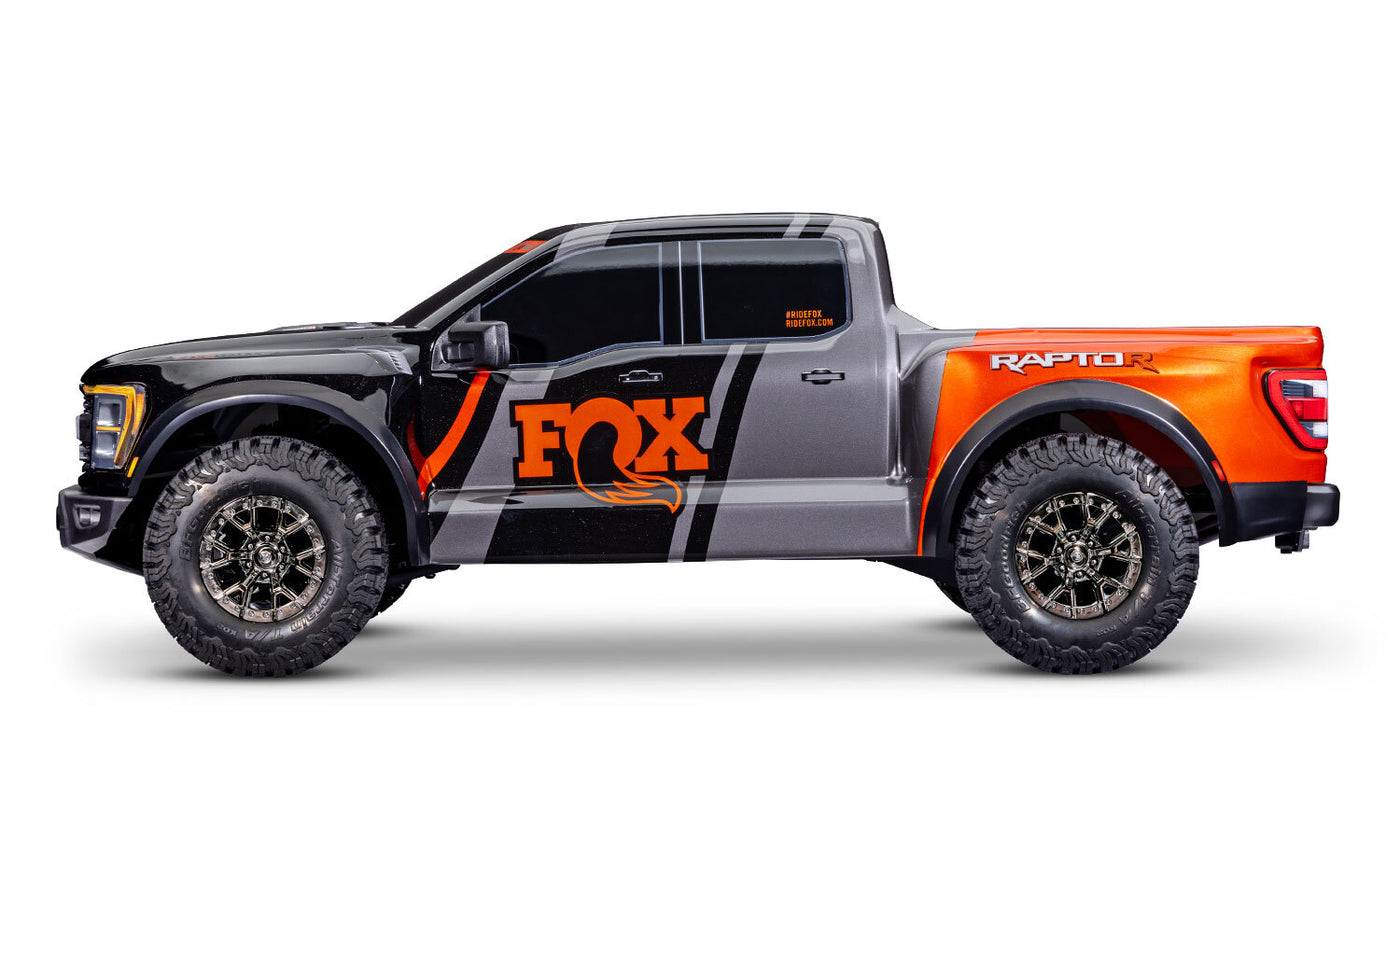 Ford® Raptor R™ 1/10 Pro Scale® 4WD Replica Truck Traxxas #101076-4 In-store pick-up only.